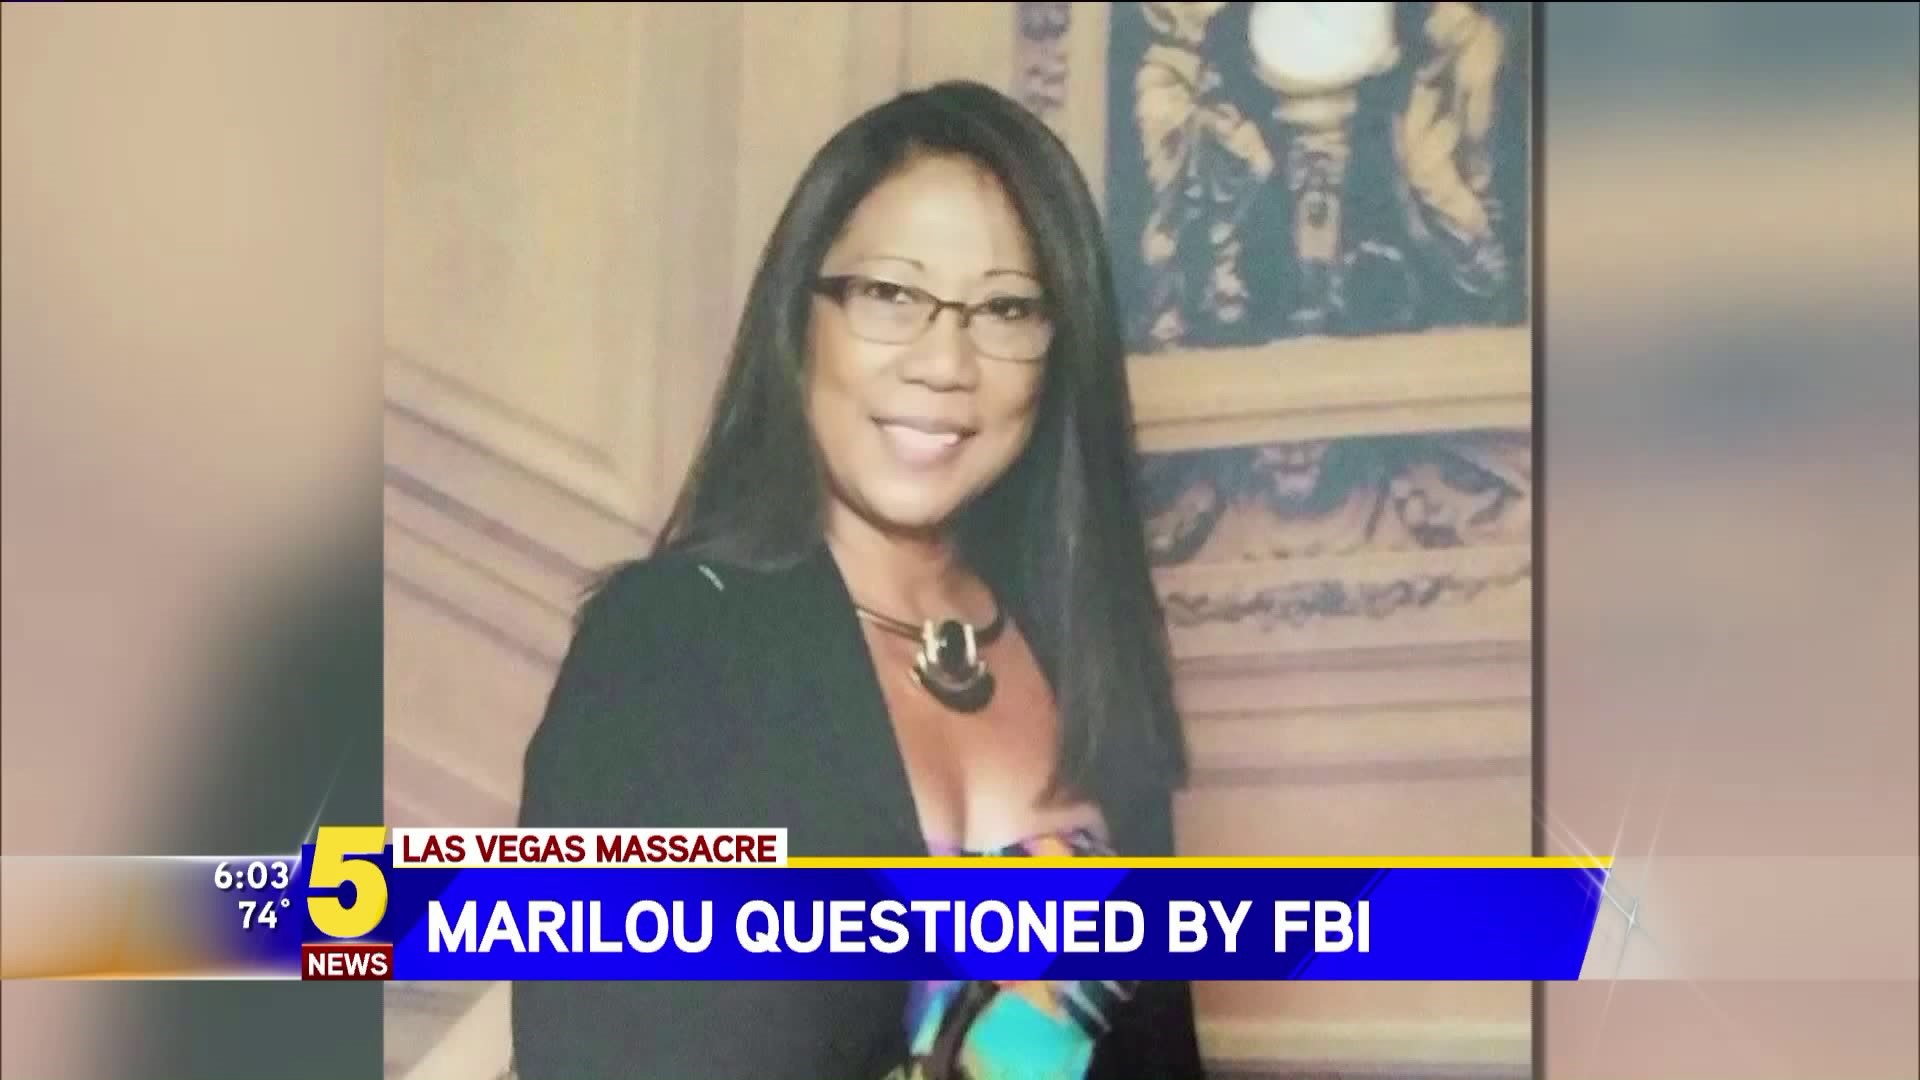 Marilou Questioned By FBI